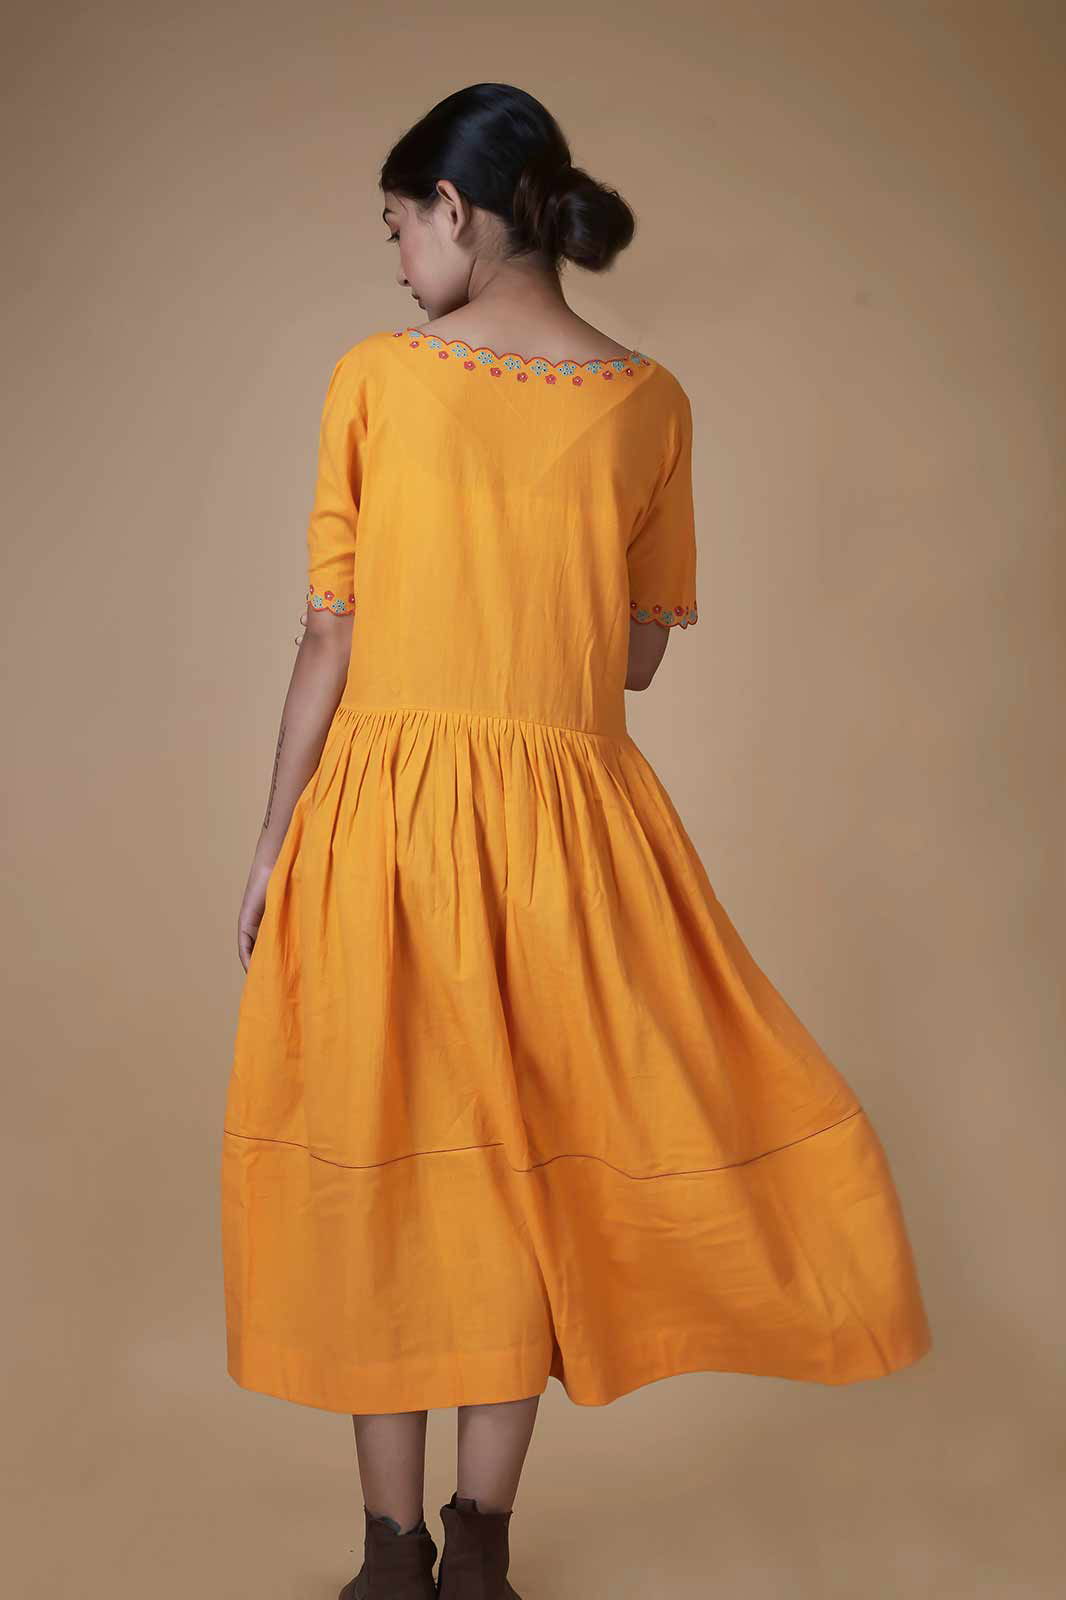 Sepia stories, Online Clothing store, Indian designer brand, women tops online, women clothing online store, handmade women tops, cotton women tops, ladies tops, eco-friendly women clothing, natural fabric, sustainable clothing women, women tops, buy women tops, buy ladies tops, earthroute brand, muslin tops, handwoven tops, handwoven clothing, cotton tops, linen shirts, women linen tops, Designer handmade tops, women shirts, women wear online